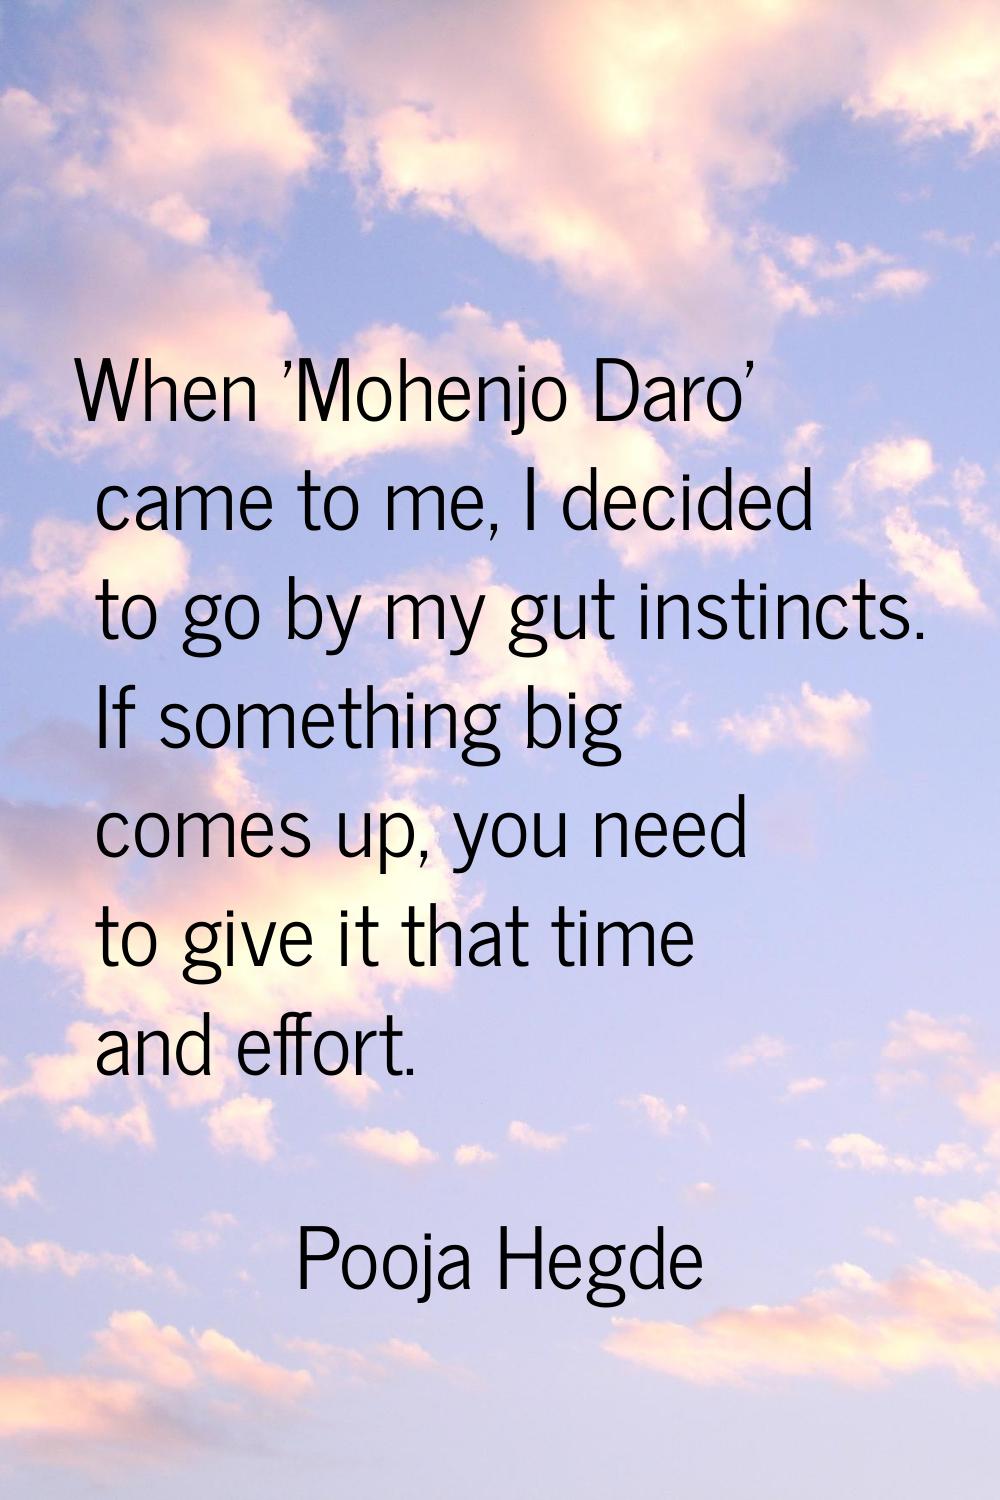 When 'Mohenjo Daro' came to me, I decided to go by my gut instincts. If something big comes up, you